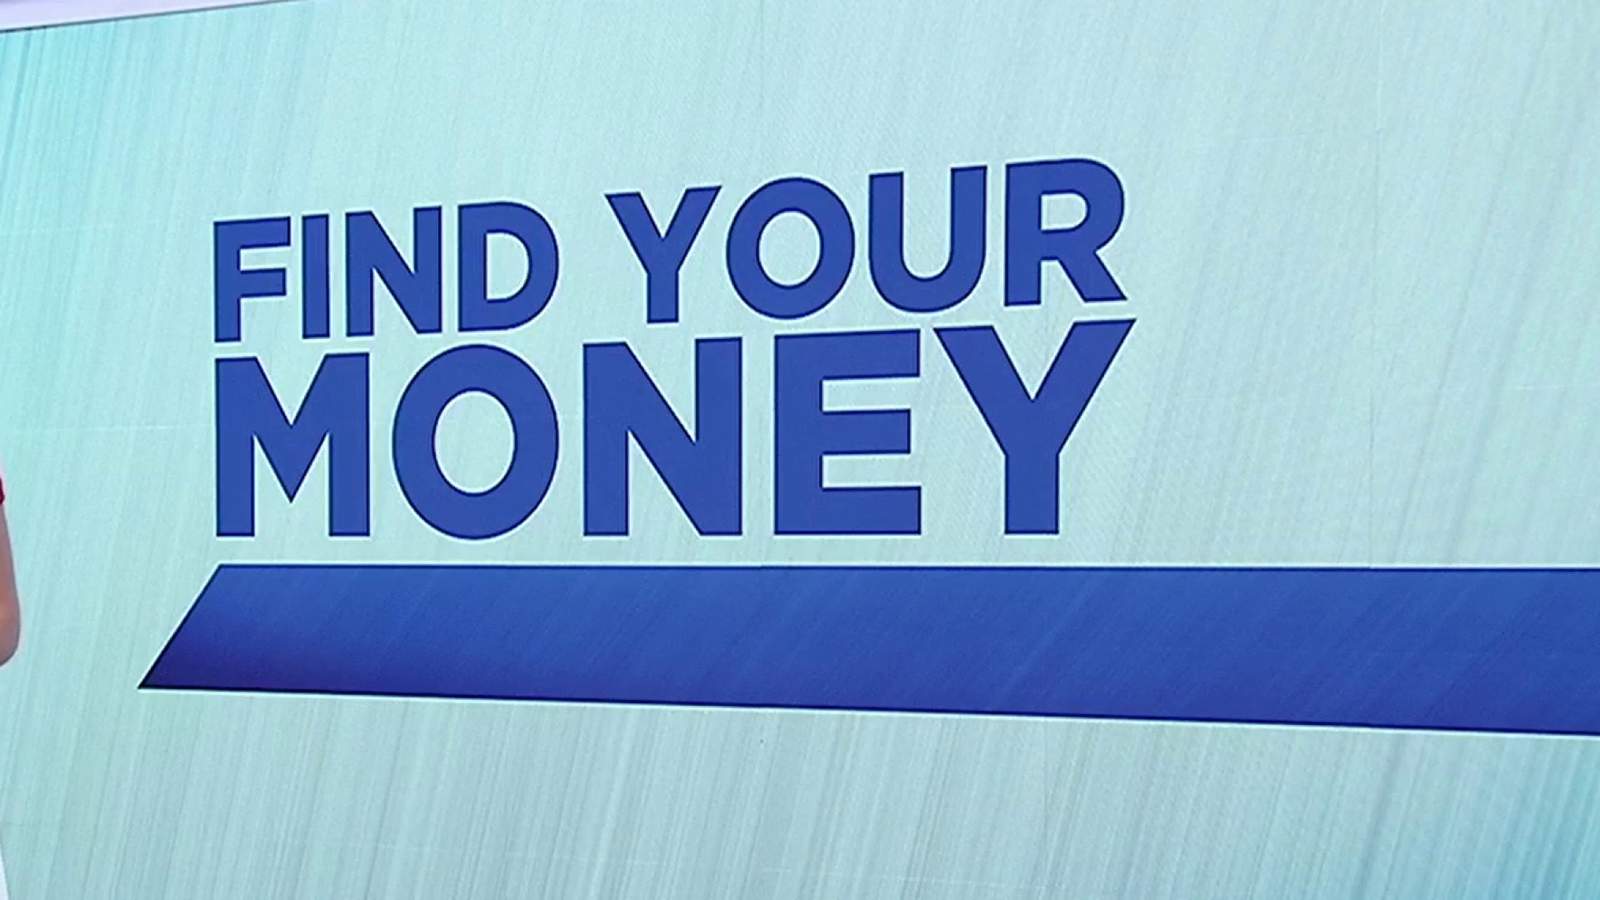 10 News works to help viewers “Find Your Money”